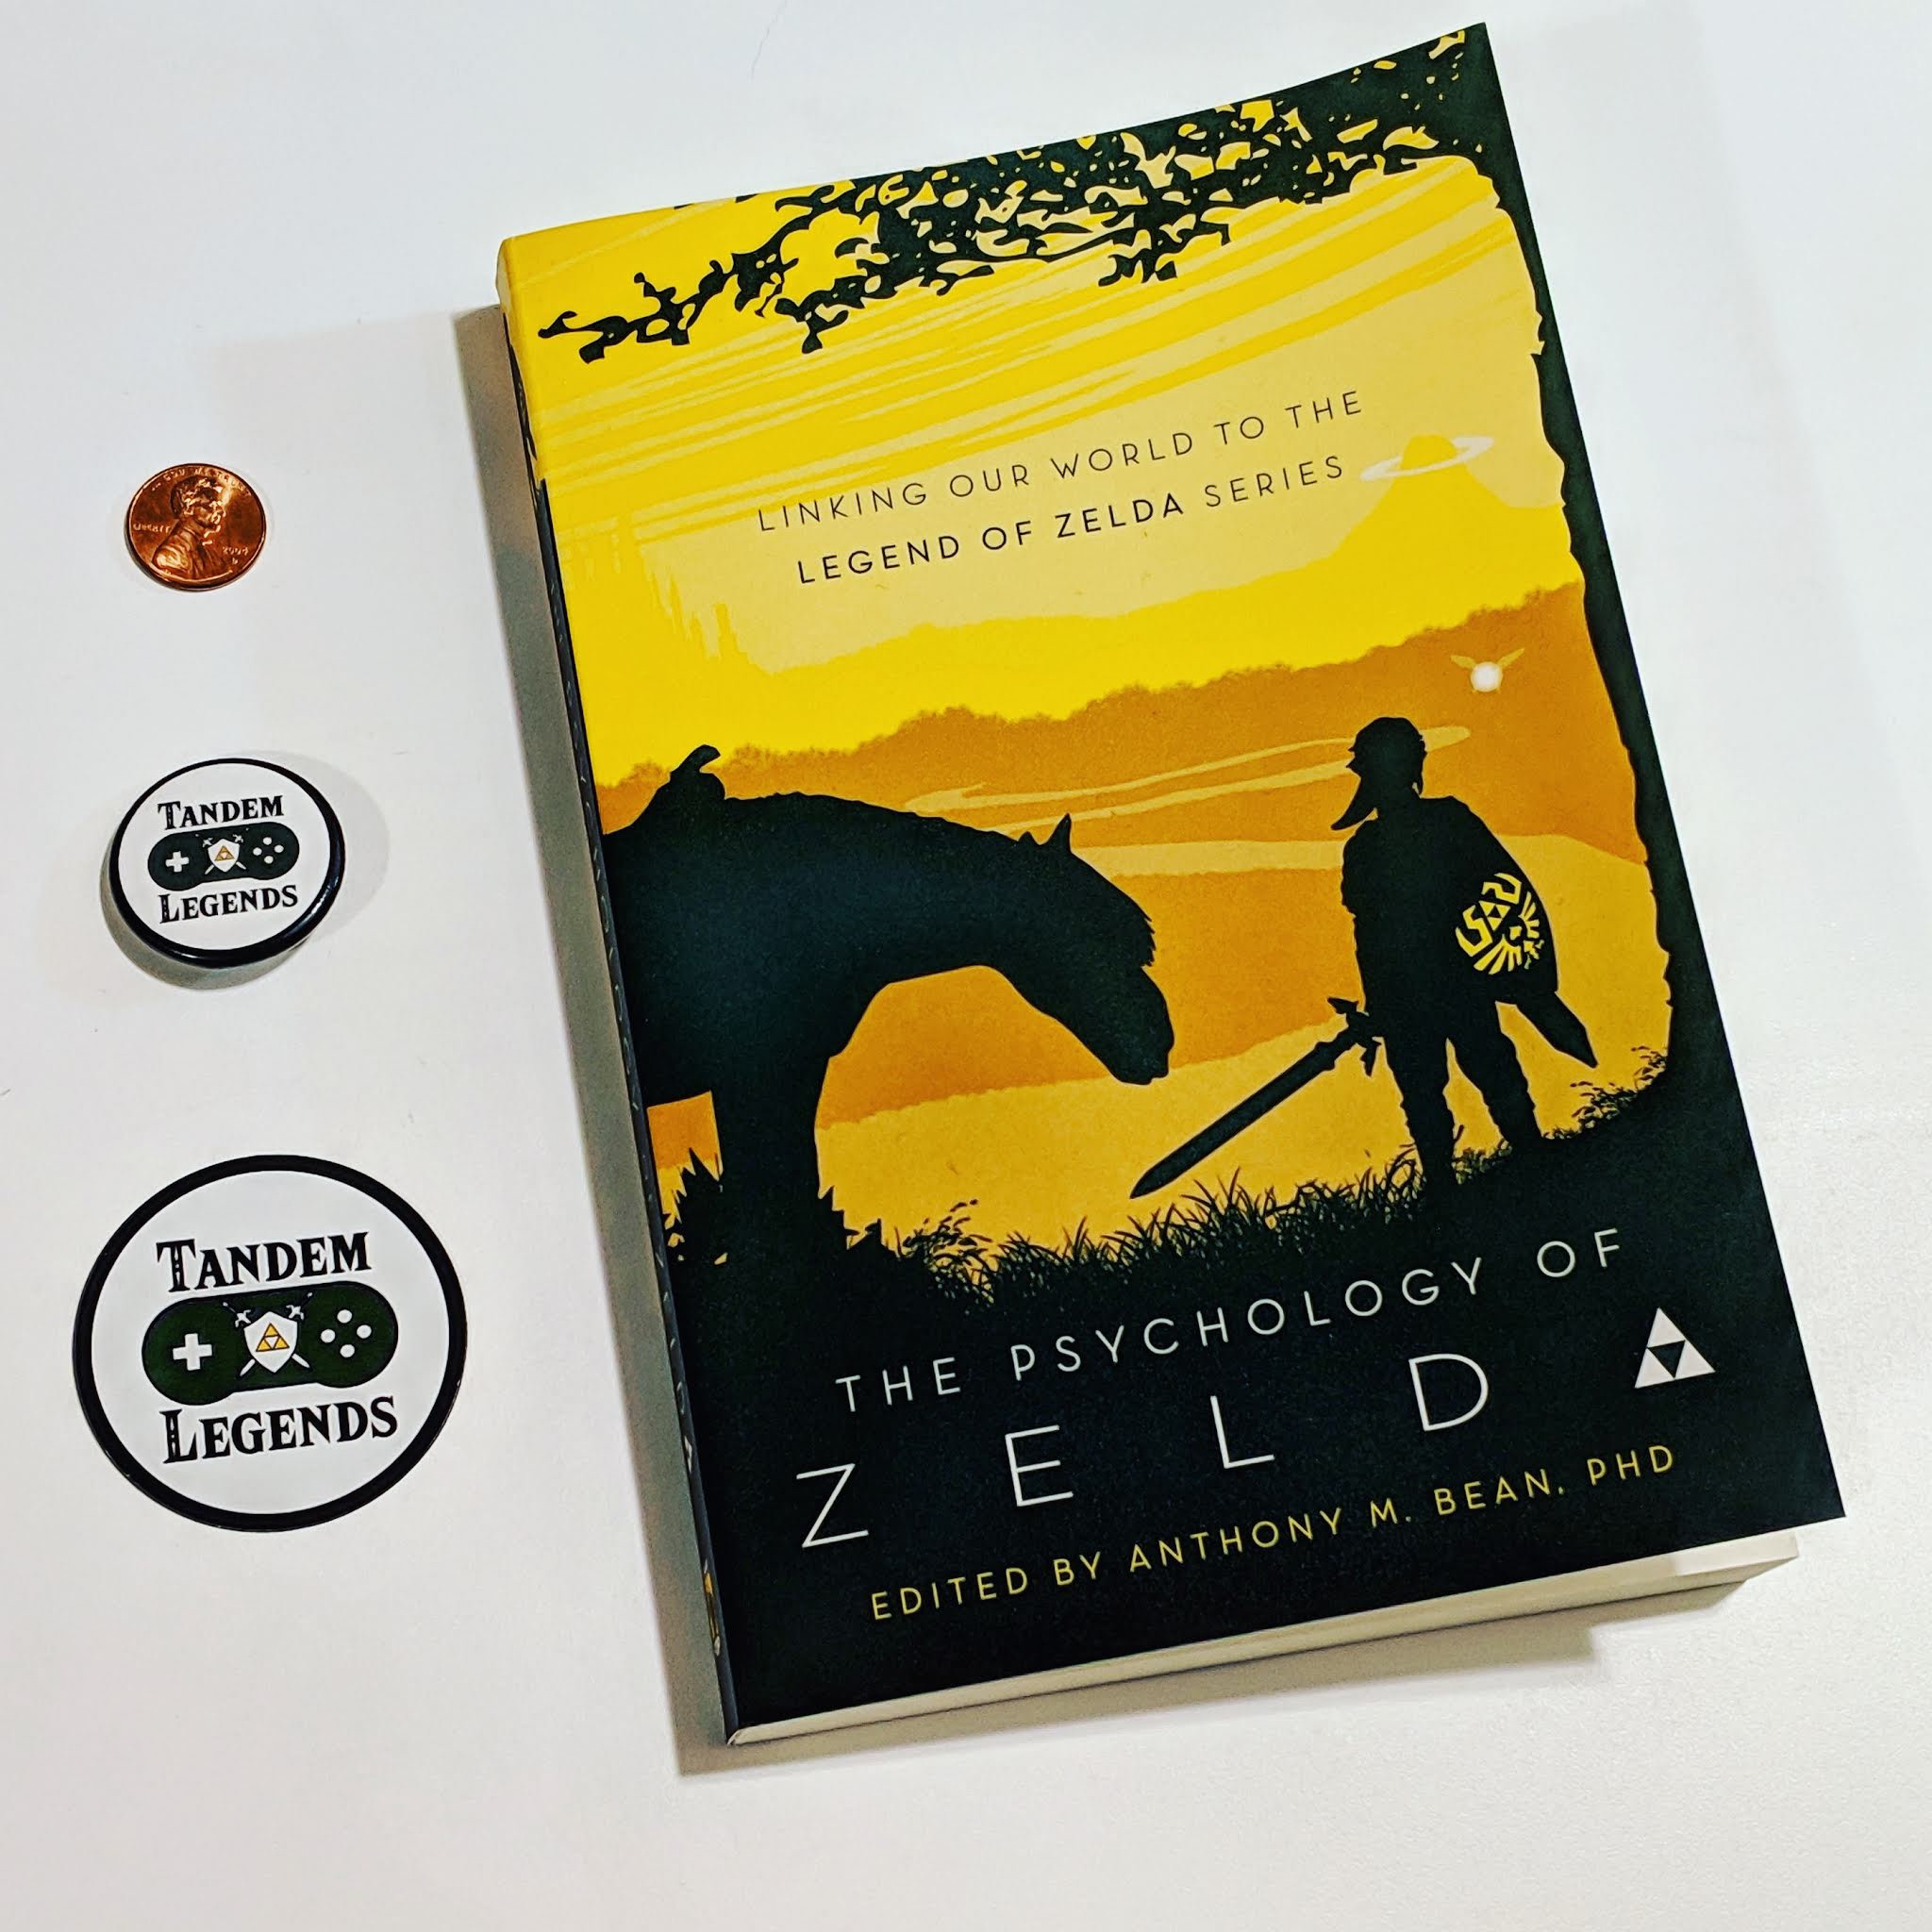 [Closed] Book Giveaway! Psychology of Zelda: Linking Our World to the Legend of Zelda Series